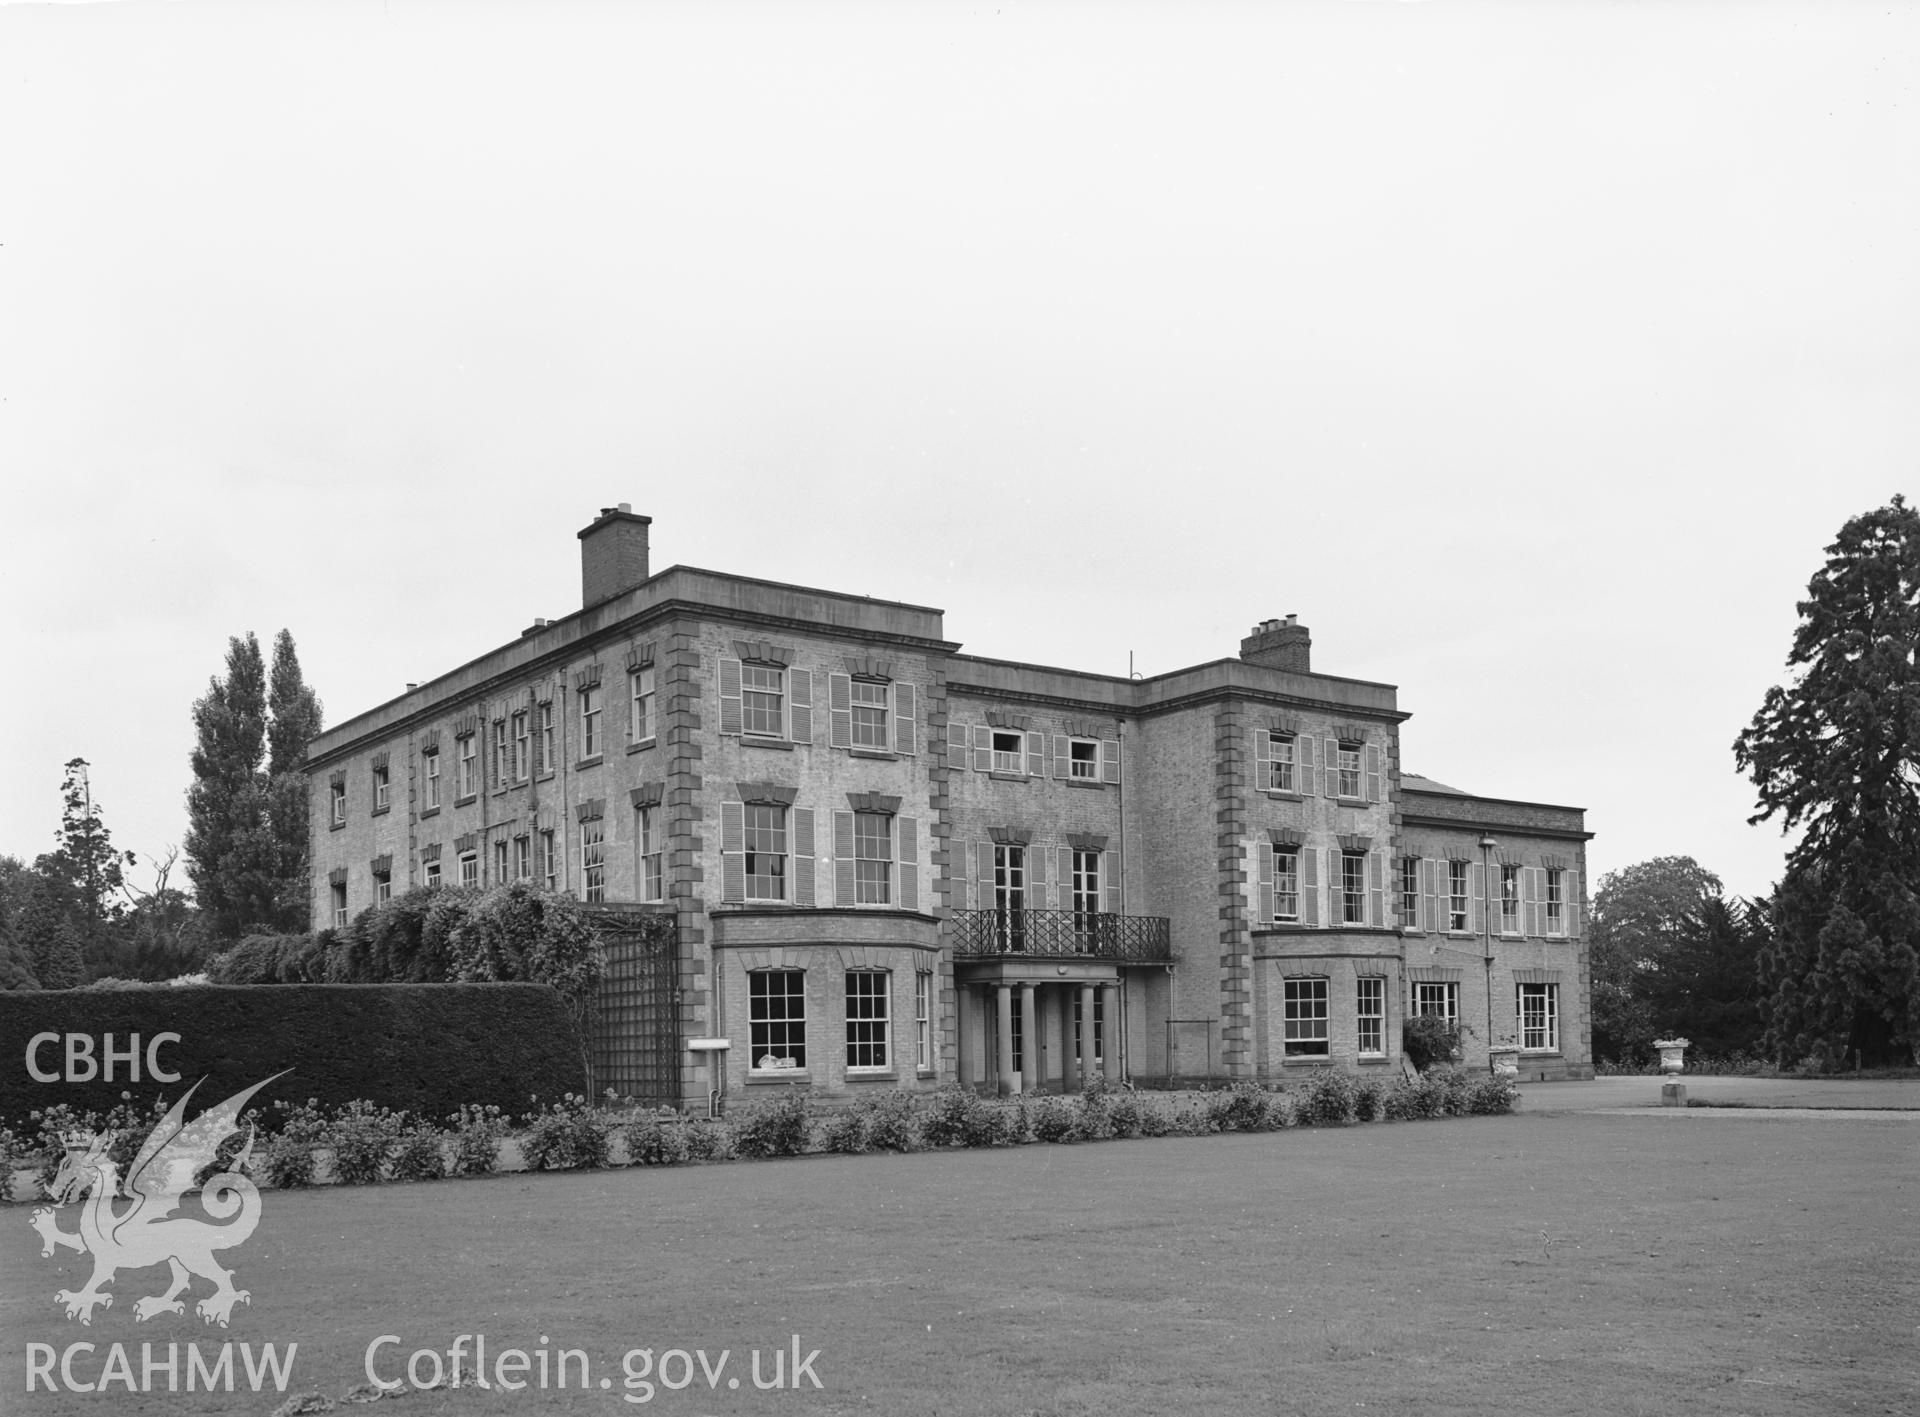 A black and white photograph of Trevalyn House, Rossett.